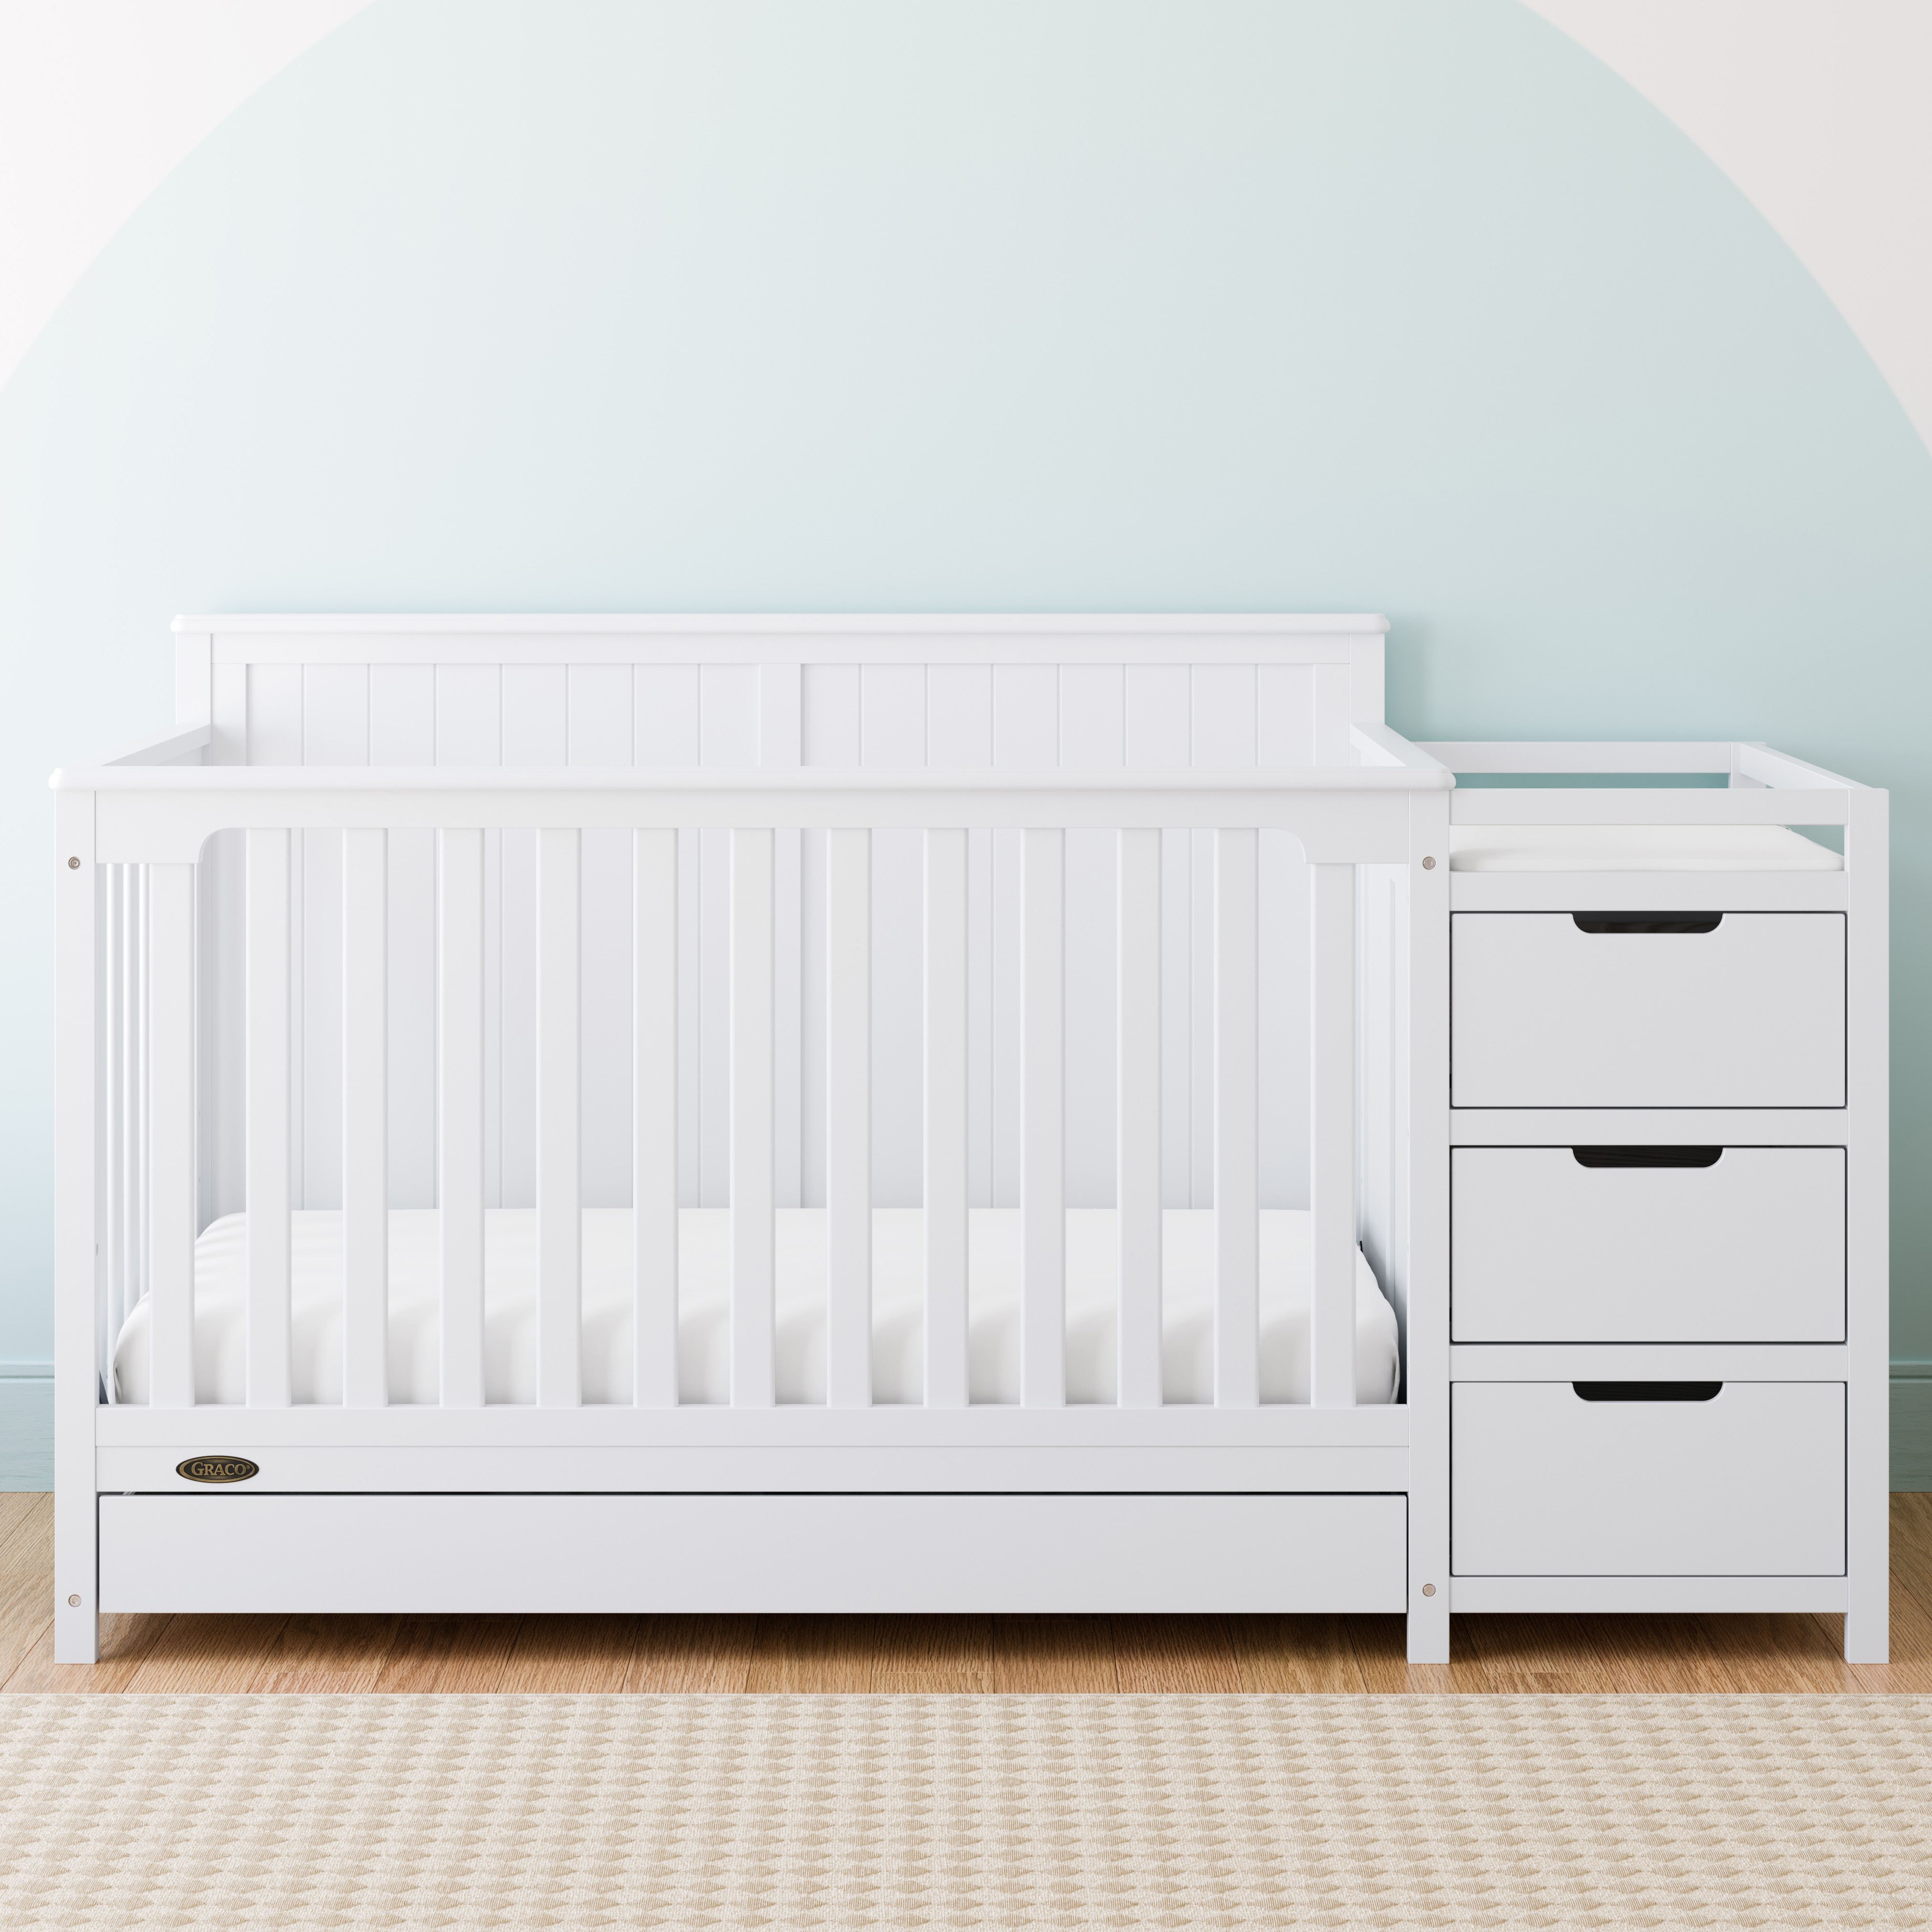 Graco Hadley 5-in-1 Convertible Crib and Changer with Drawer, White - image 4 of 14